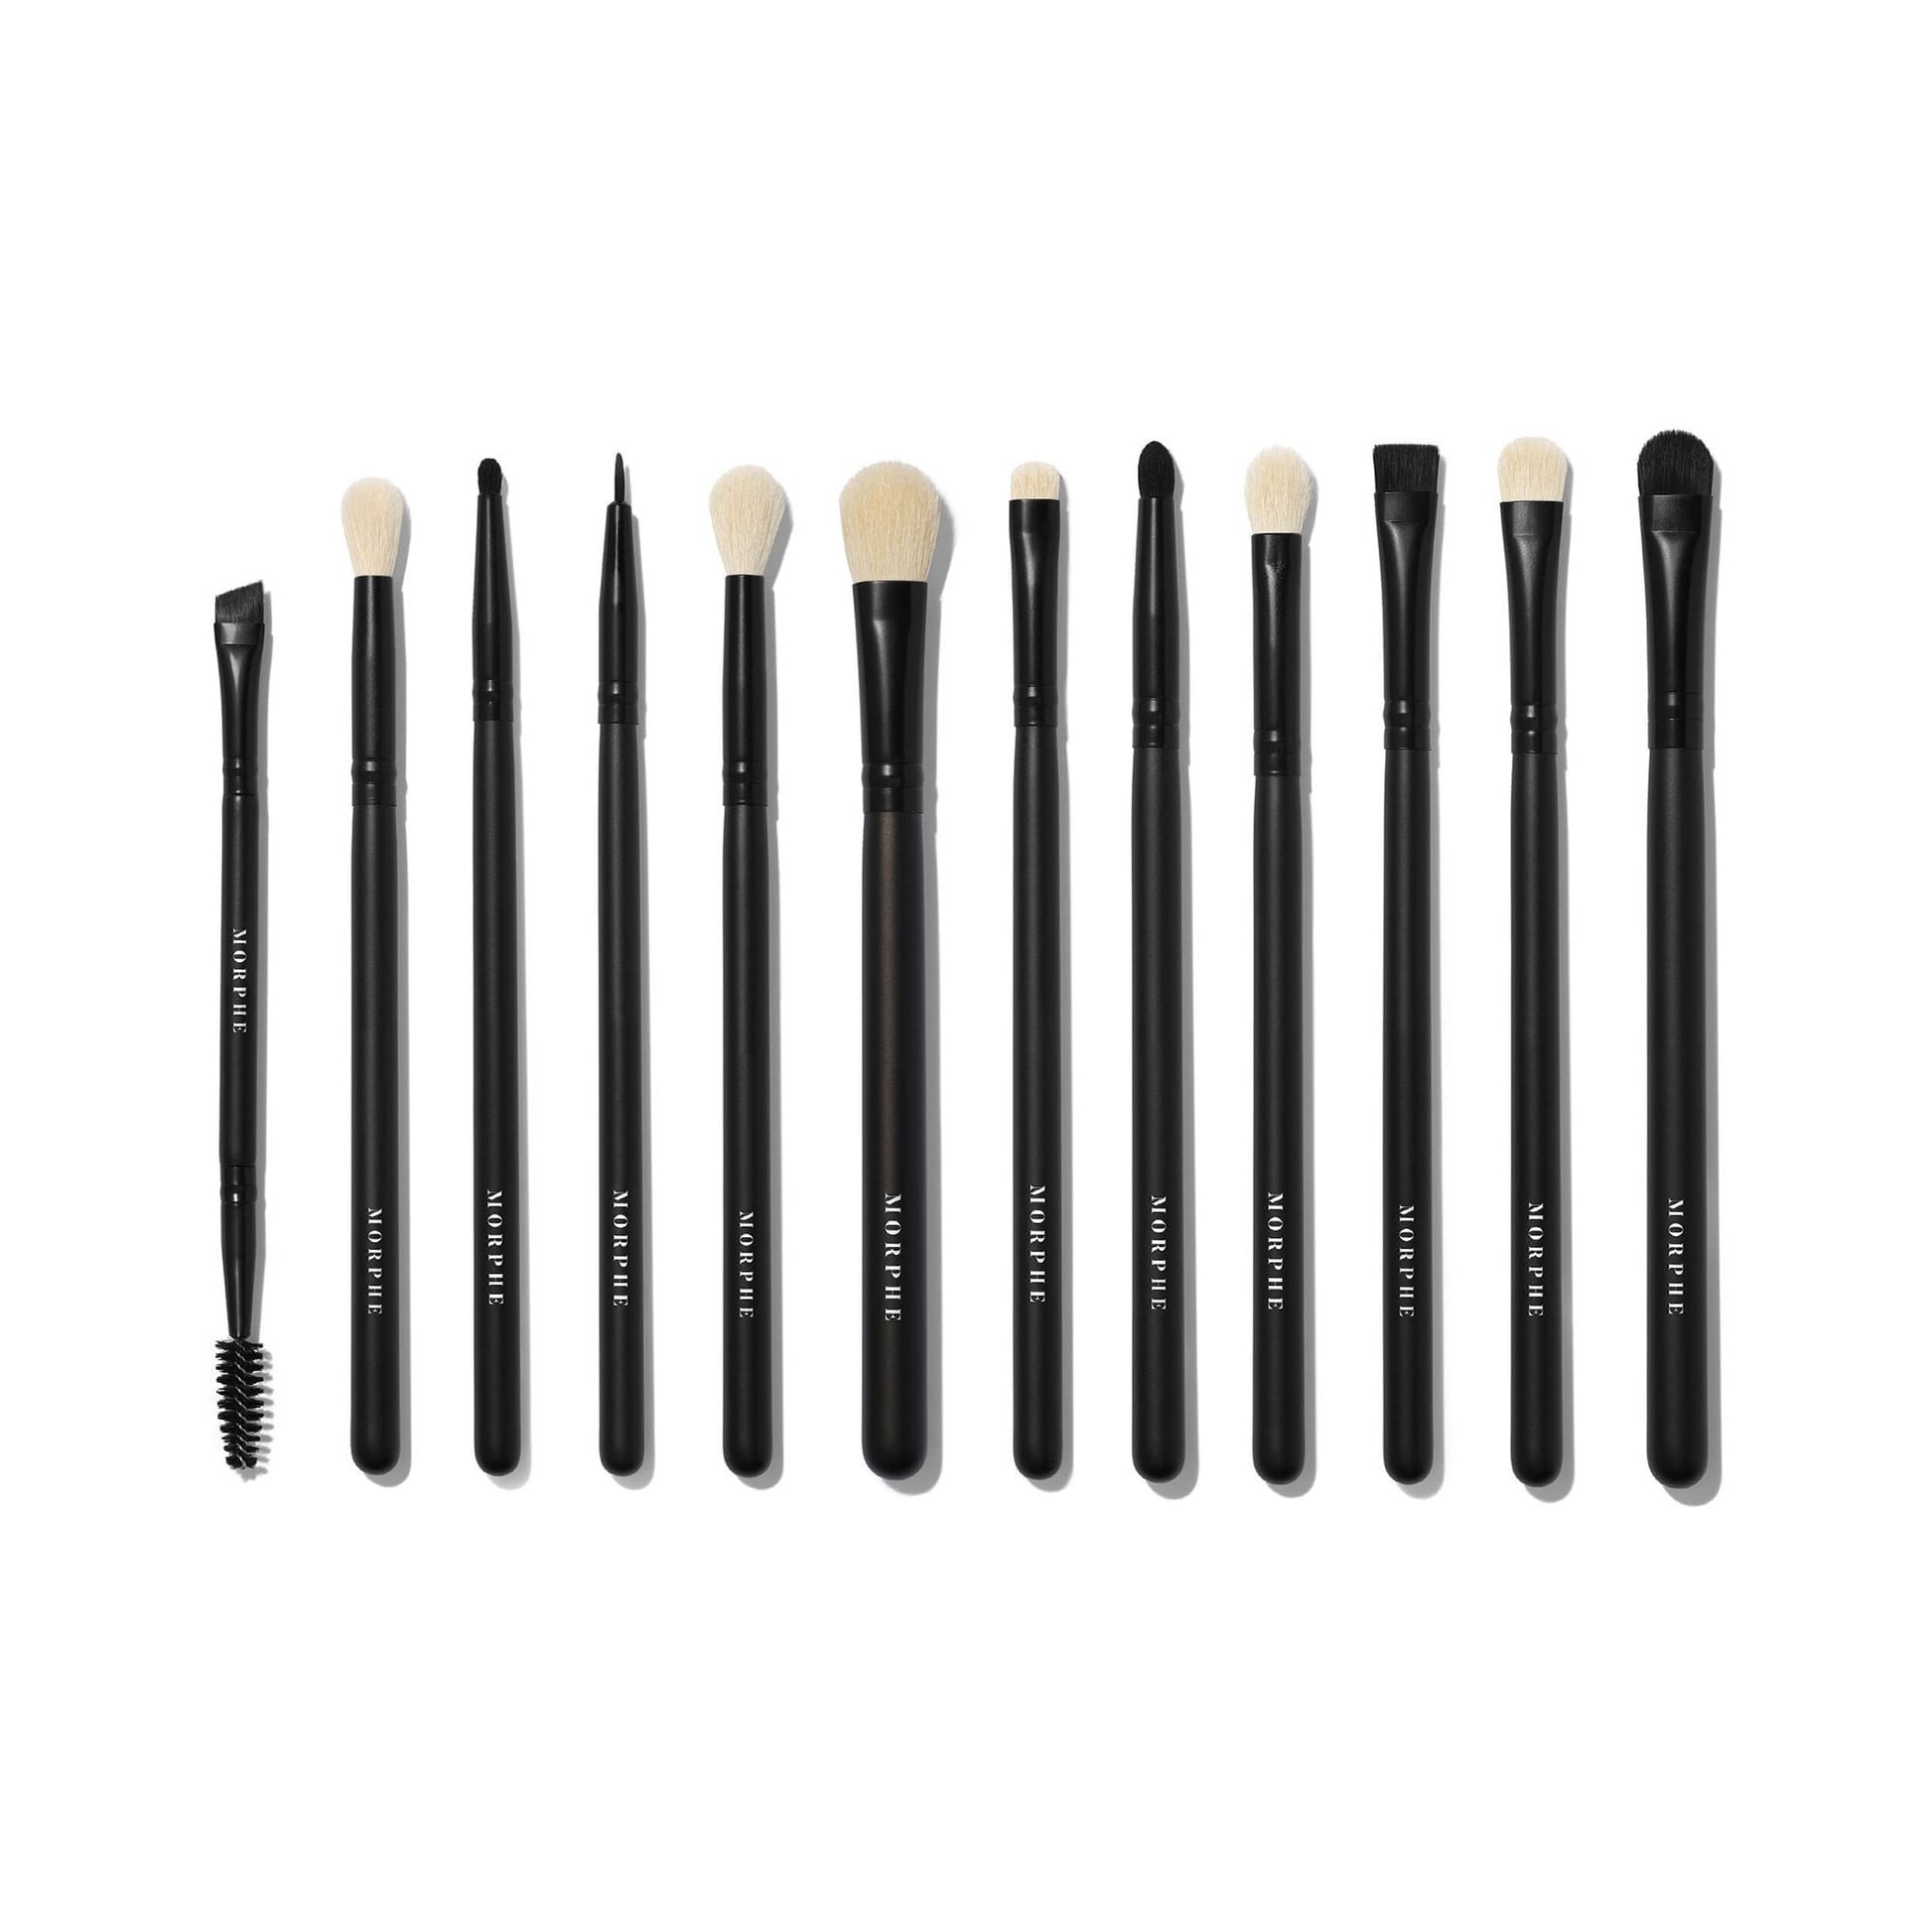 Morphe Cosmetics Eye Obsessed Brush Collection